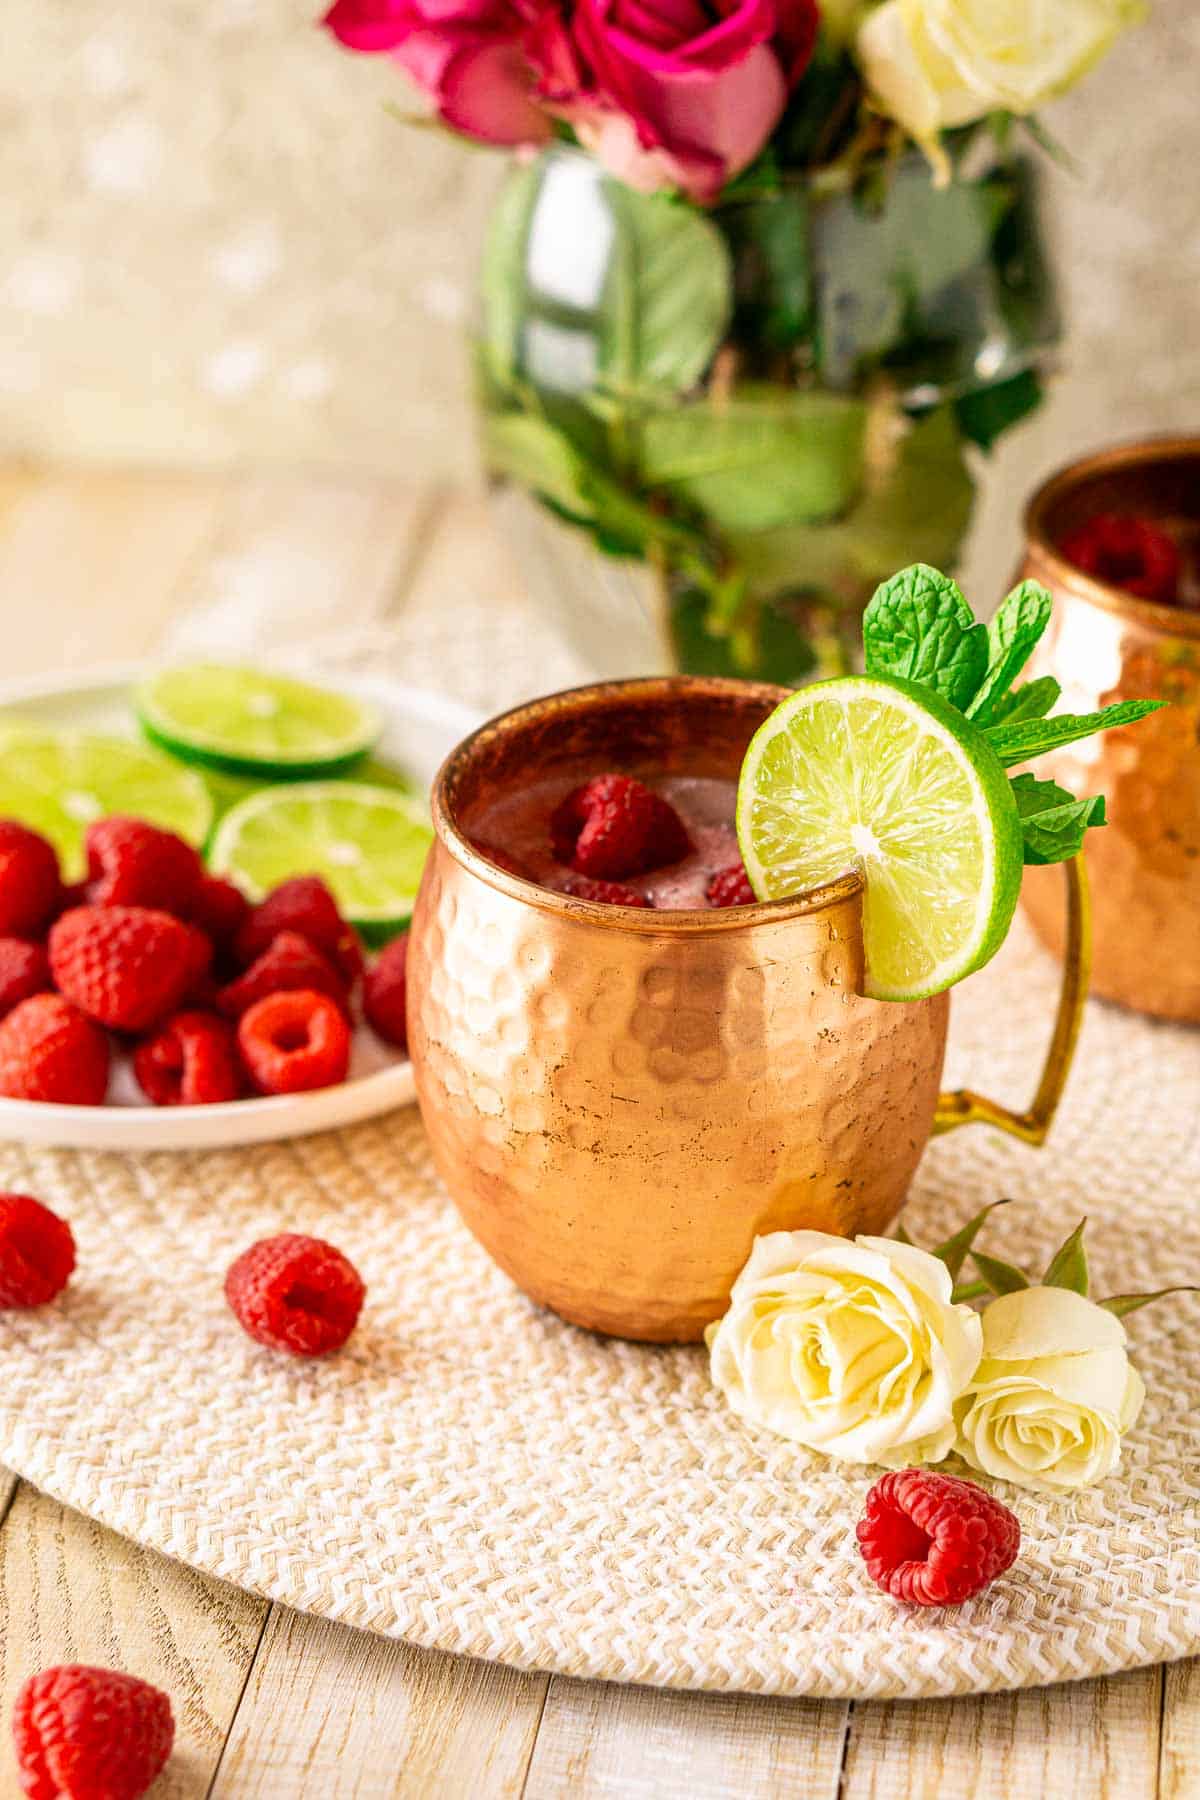 The raspberry Moscow mule on a straw placemat with a plate of raspberries to the side and a bouquet of flowers in the background.